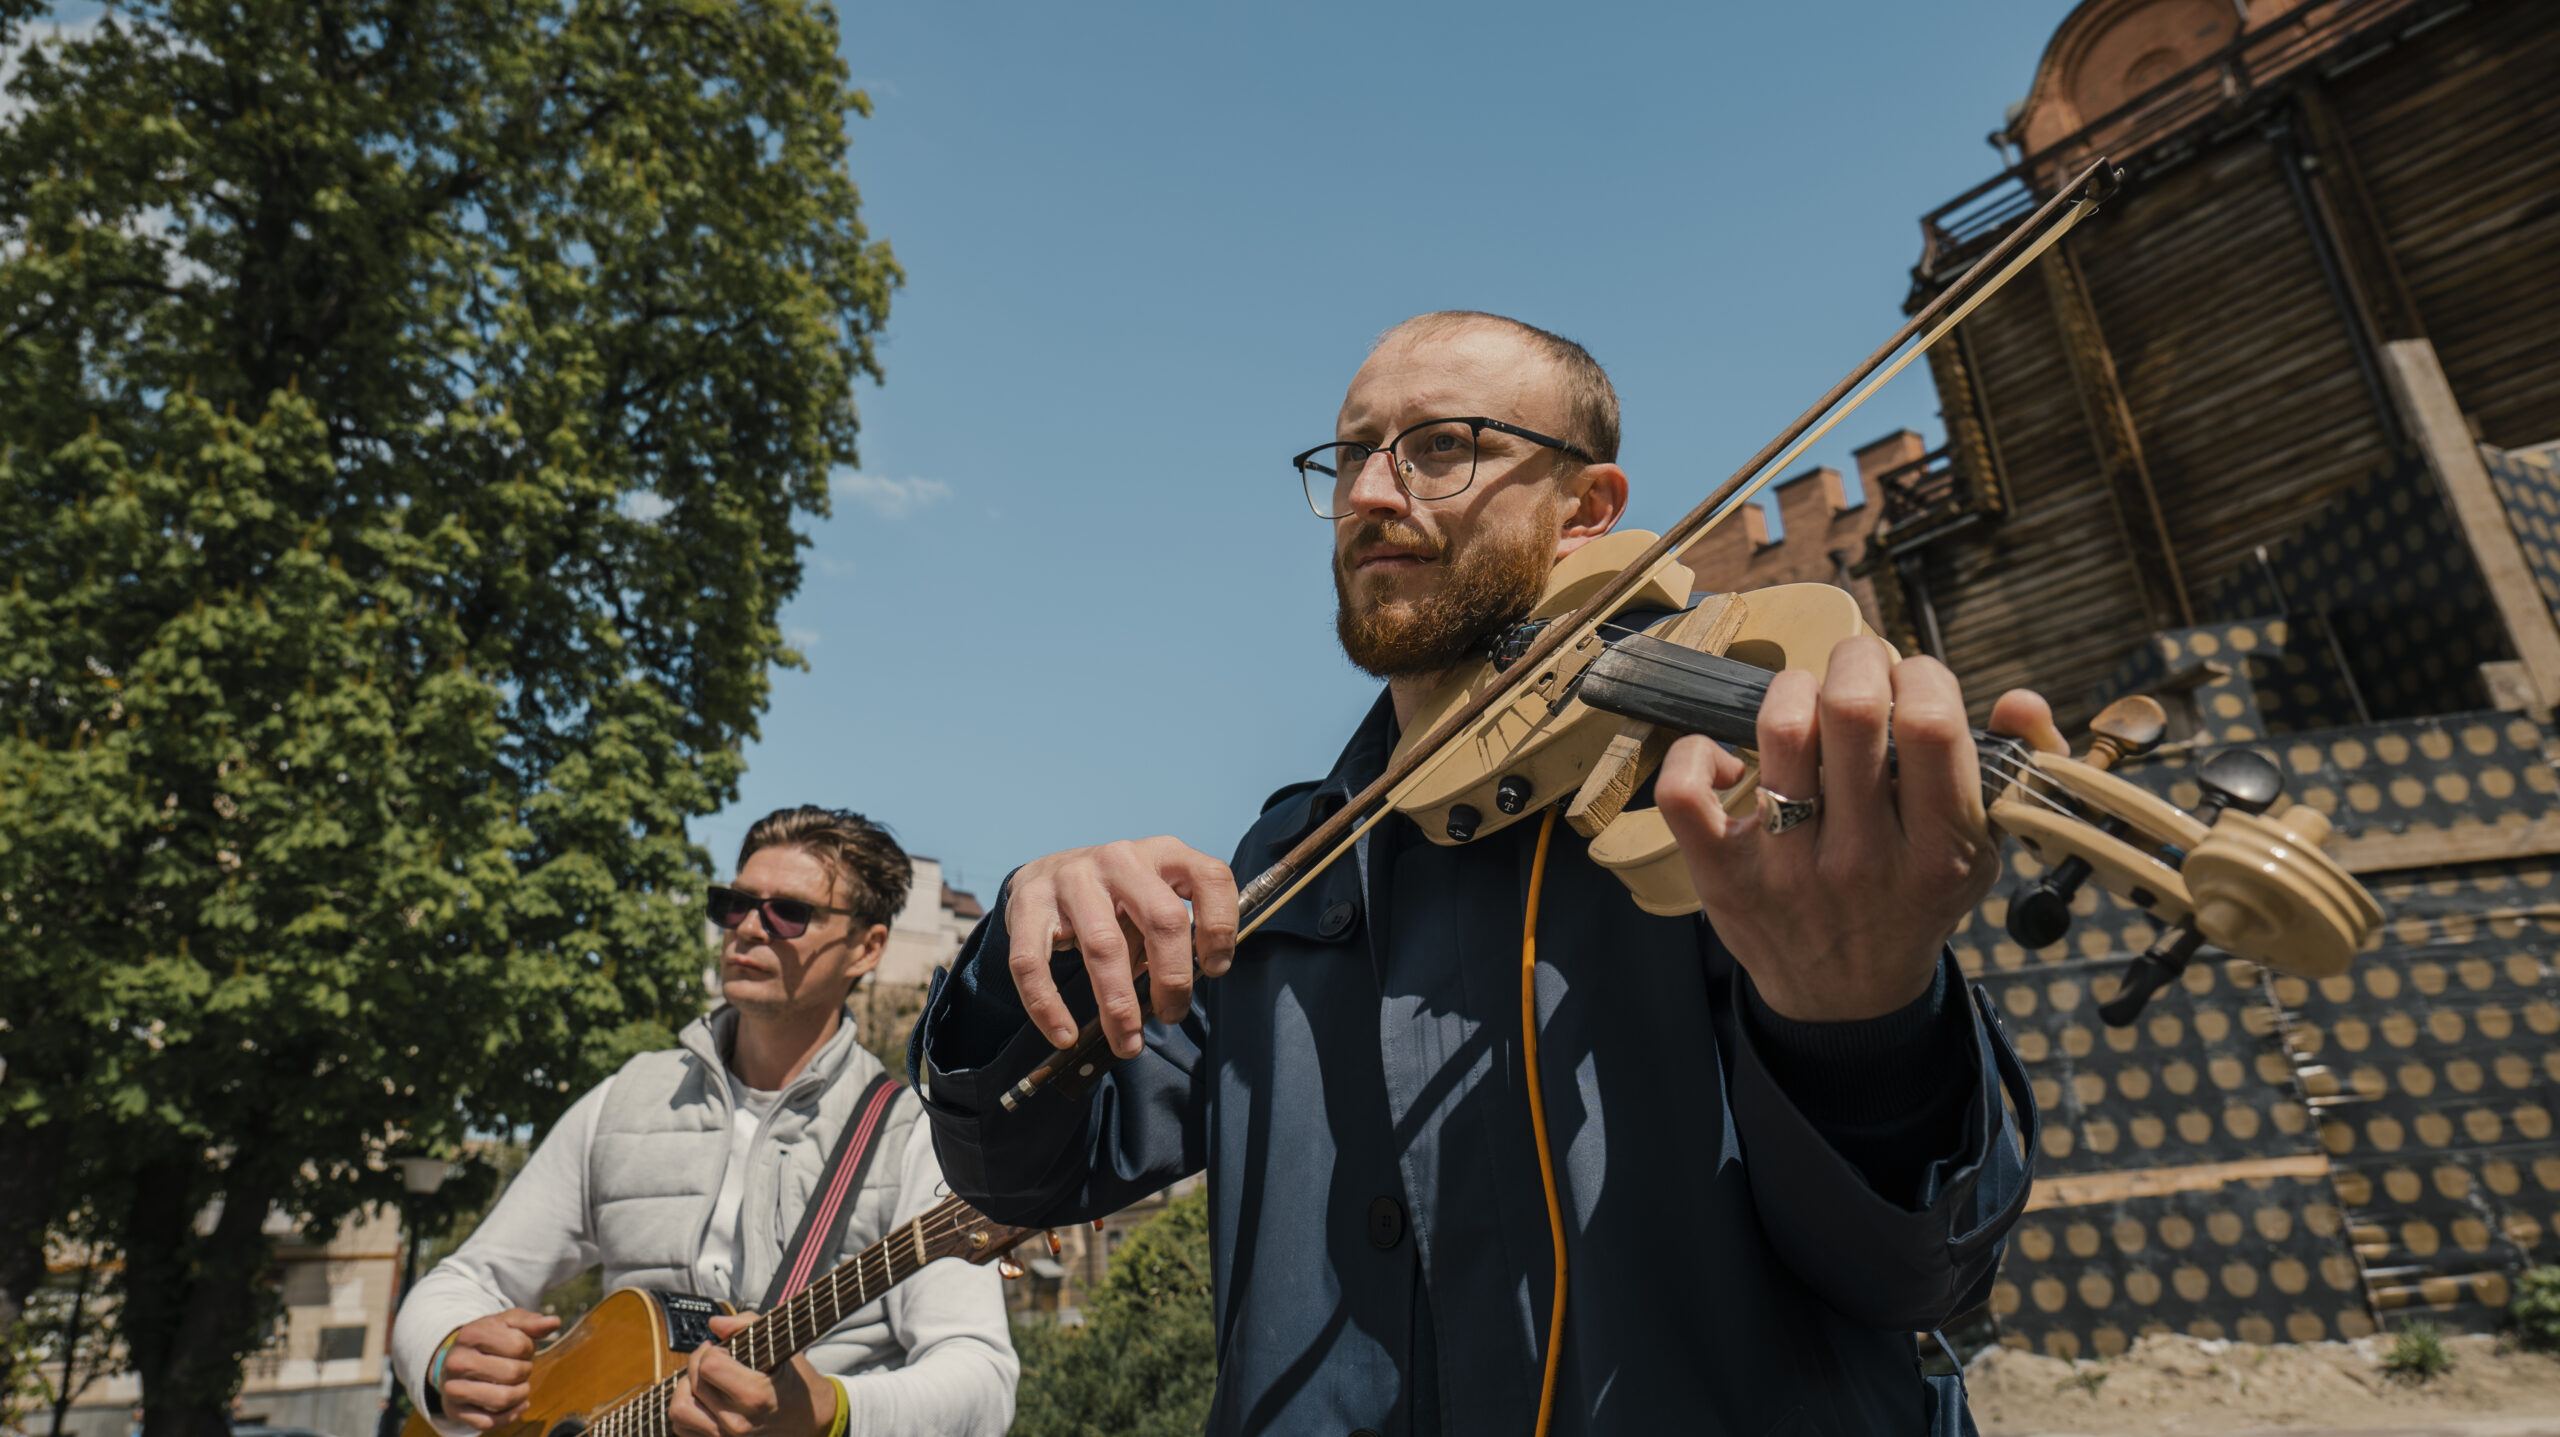 Pavlo Frumin and Stas Golodyuk are modern musicians from Kyiv. At the outset of the War in Ukraine, they decided to adapt their repertoire. Previously, they had only performed foreign compositions, but now they exclusively perform Ukrainian songs in celebration of their heritage and culture